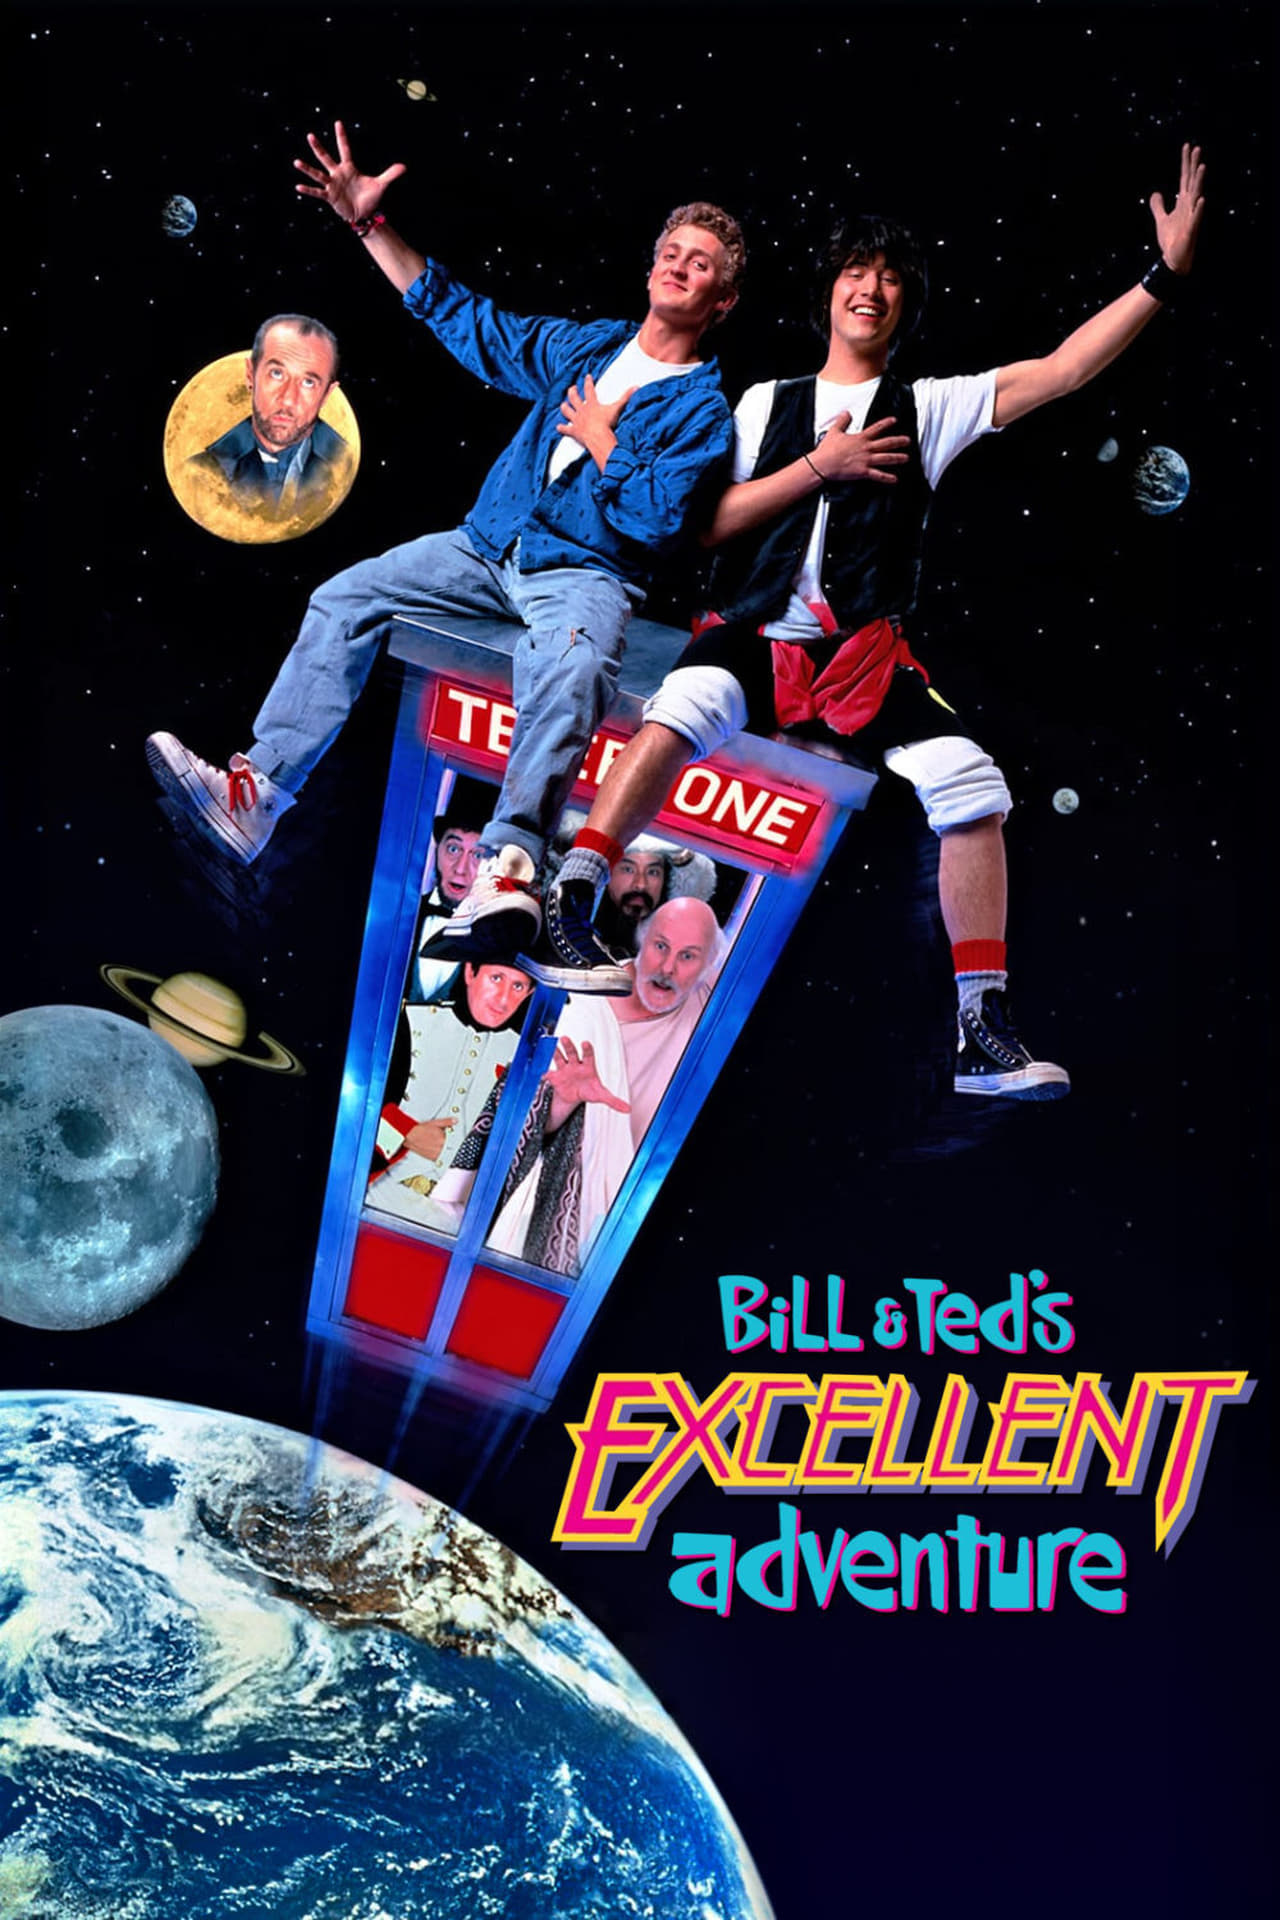 Poster of the movie